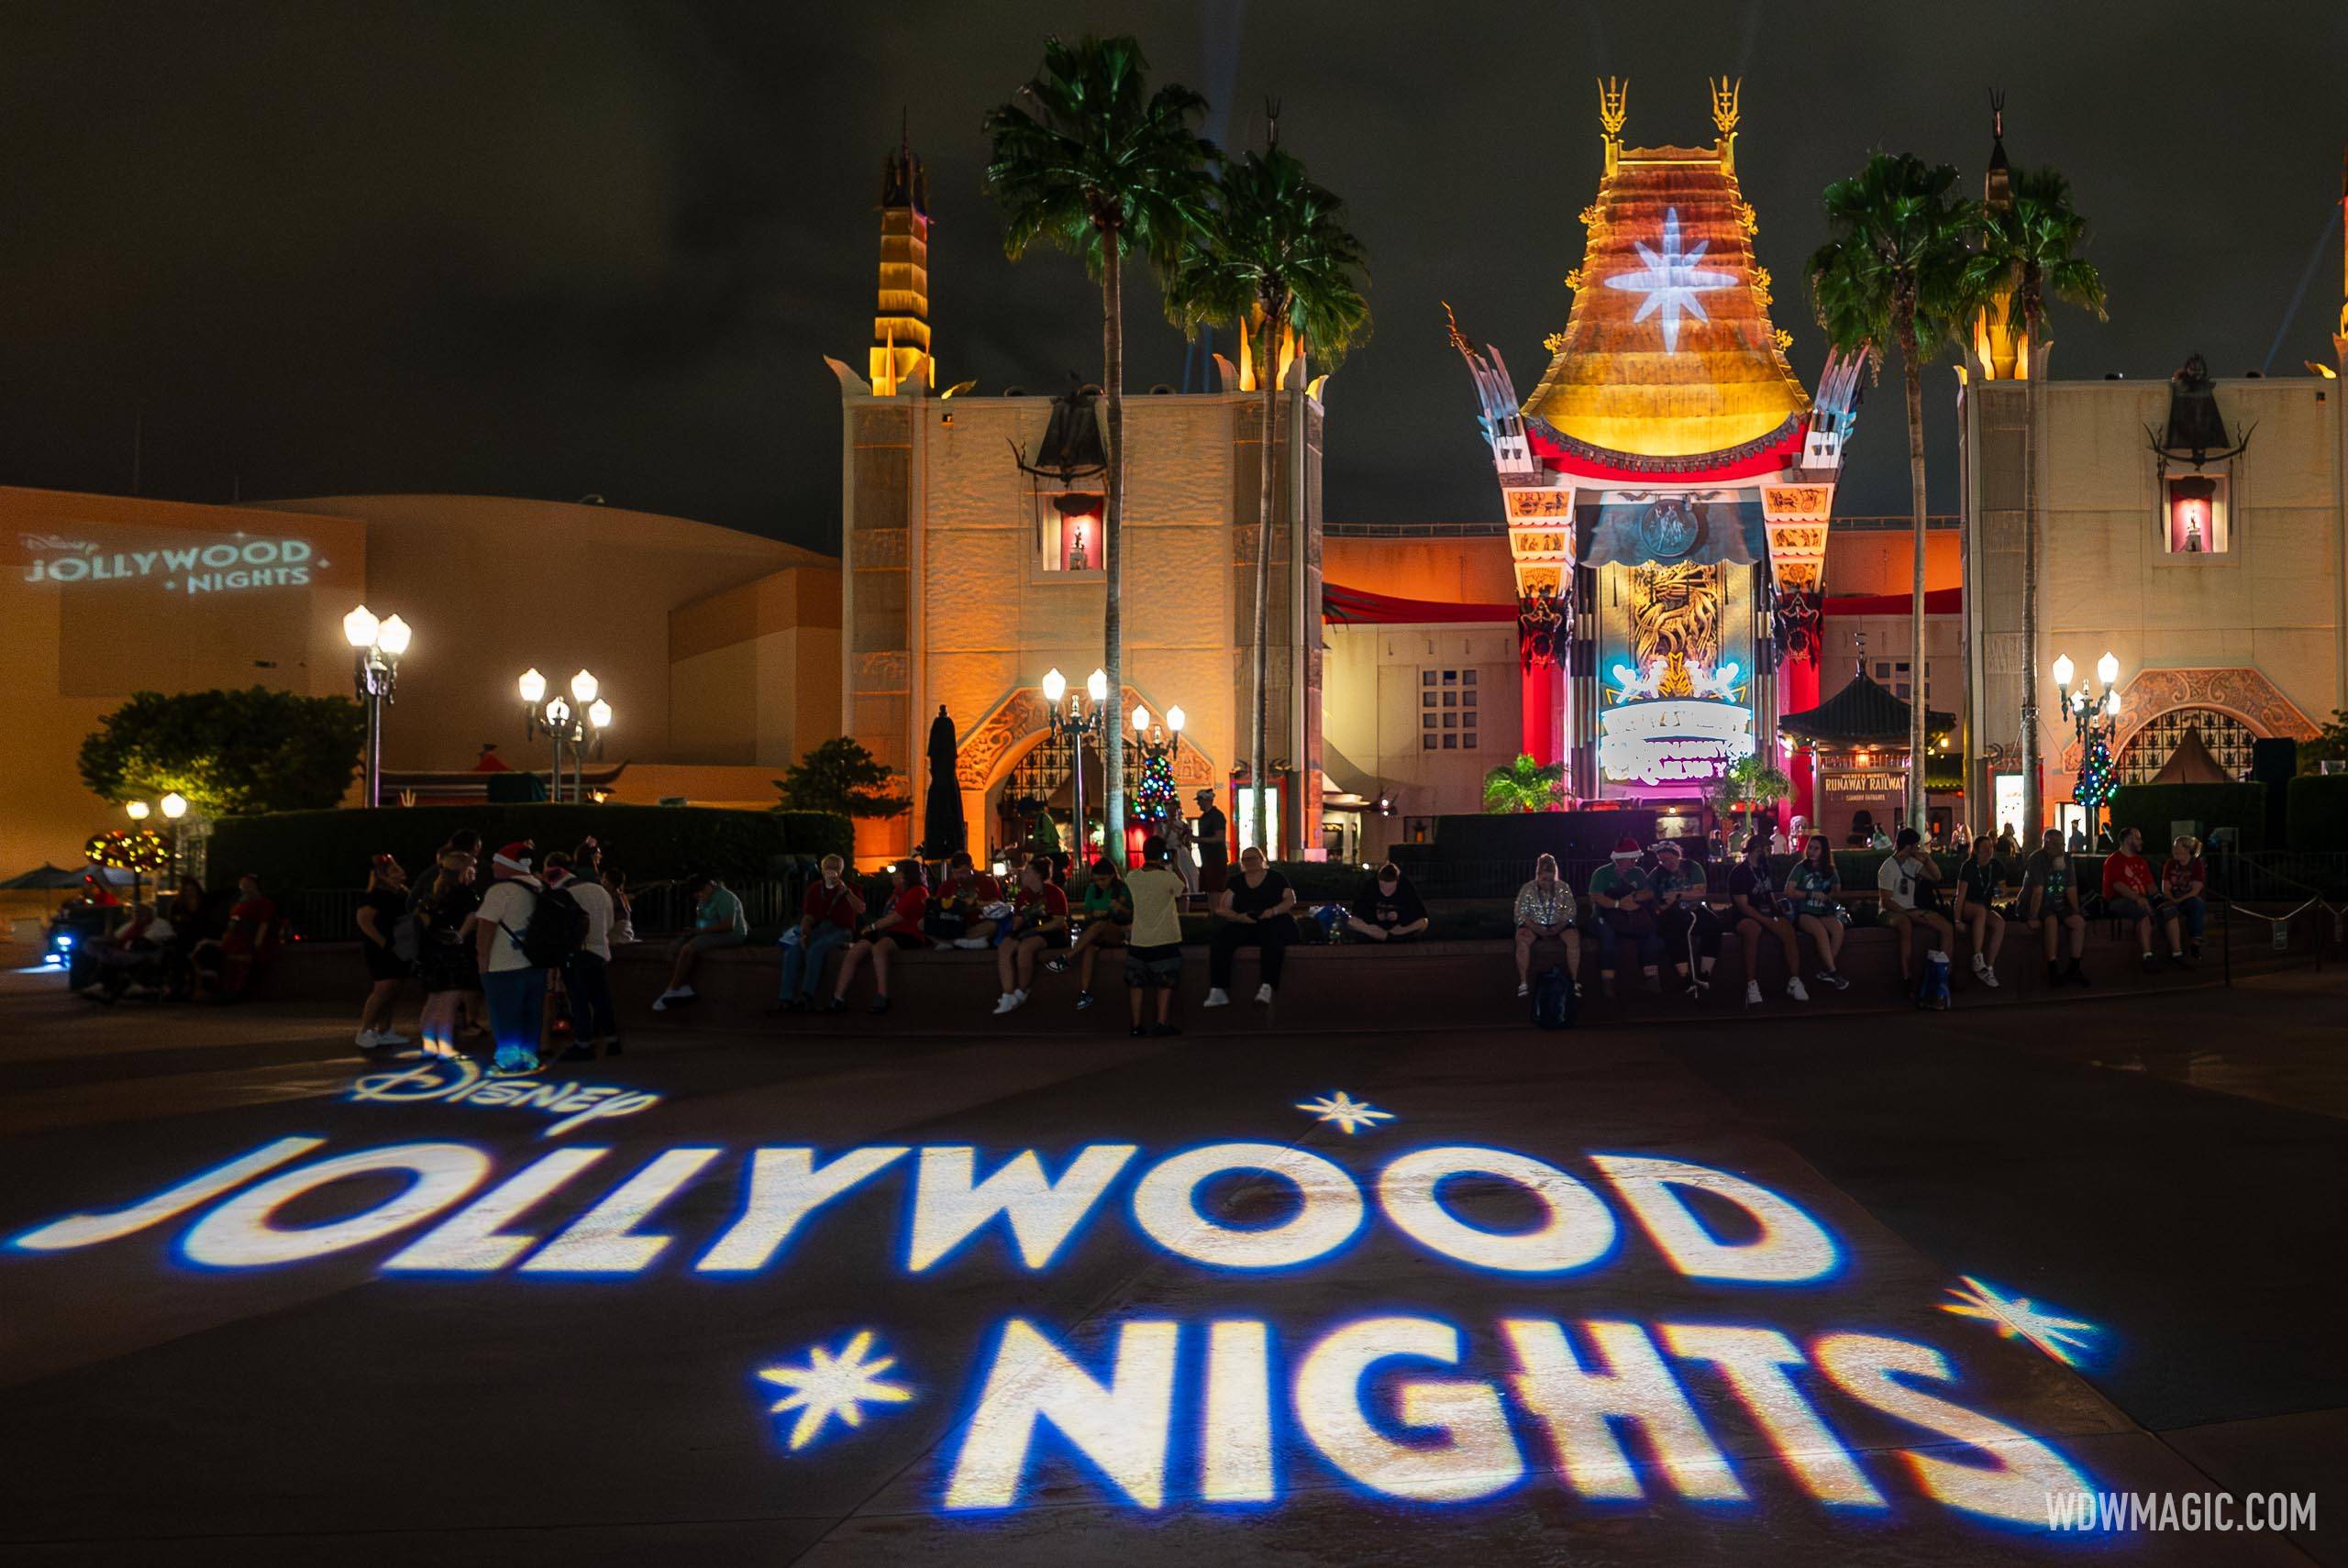 Final night of the 2023 Disney Jollywood Nights event is now sold out